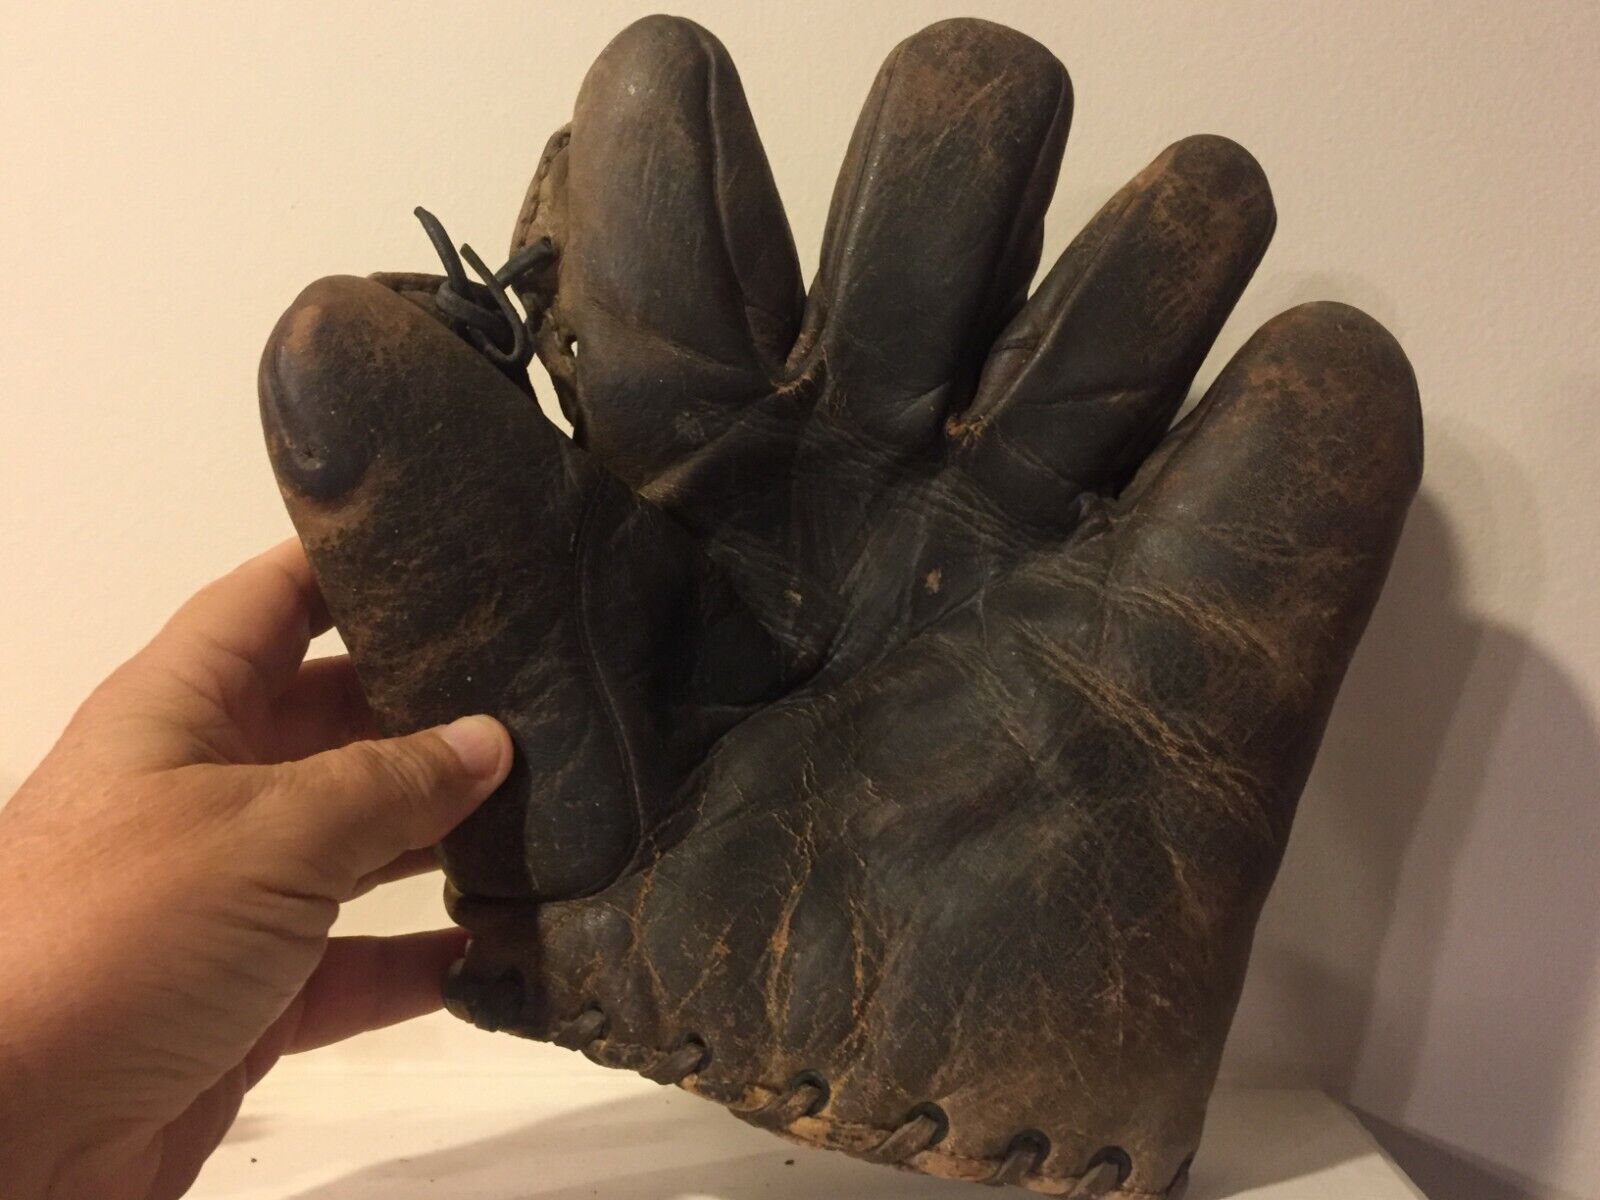 Antique Spalding Baseball Glove - Extremely Rare 1920s in Exceptional Condition